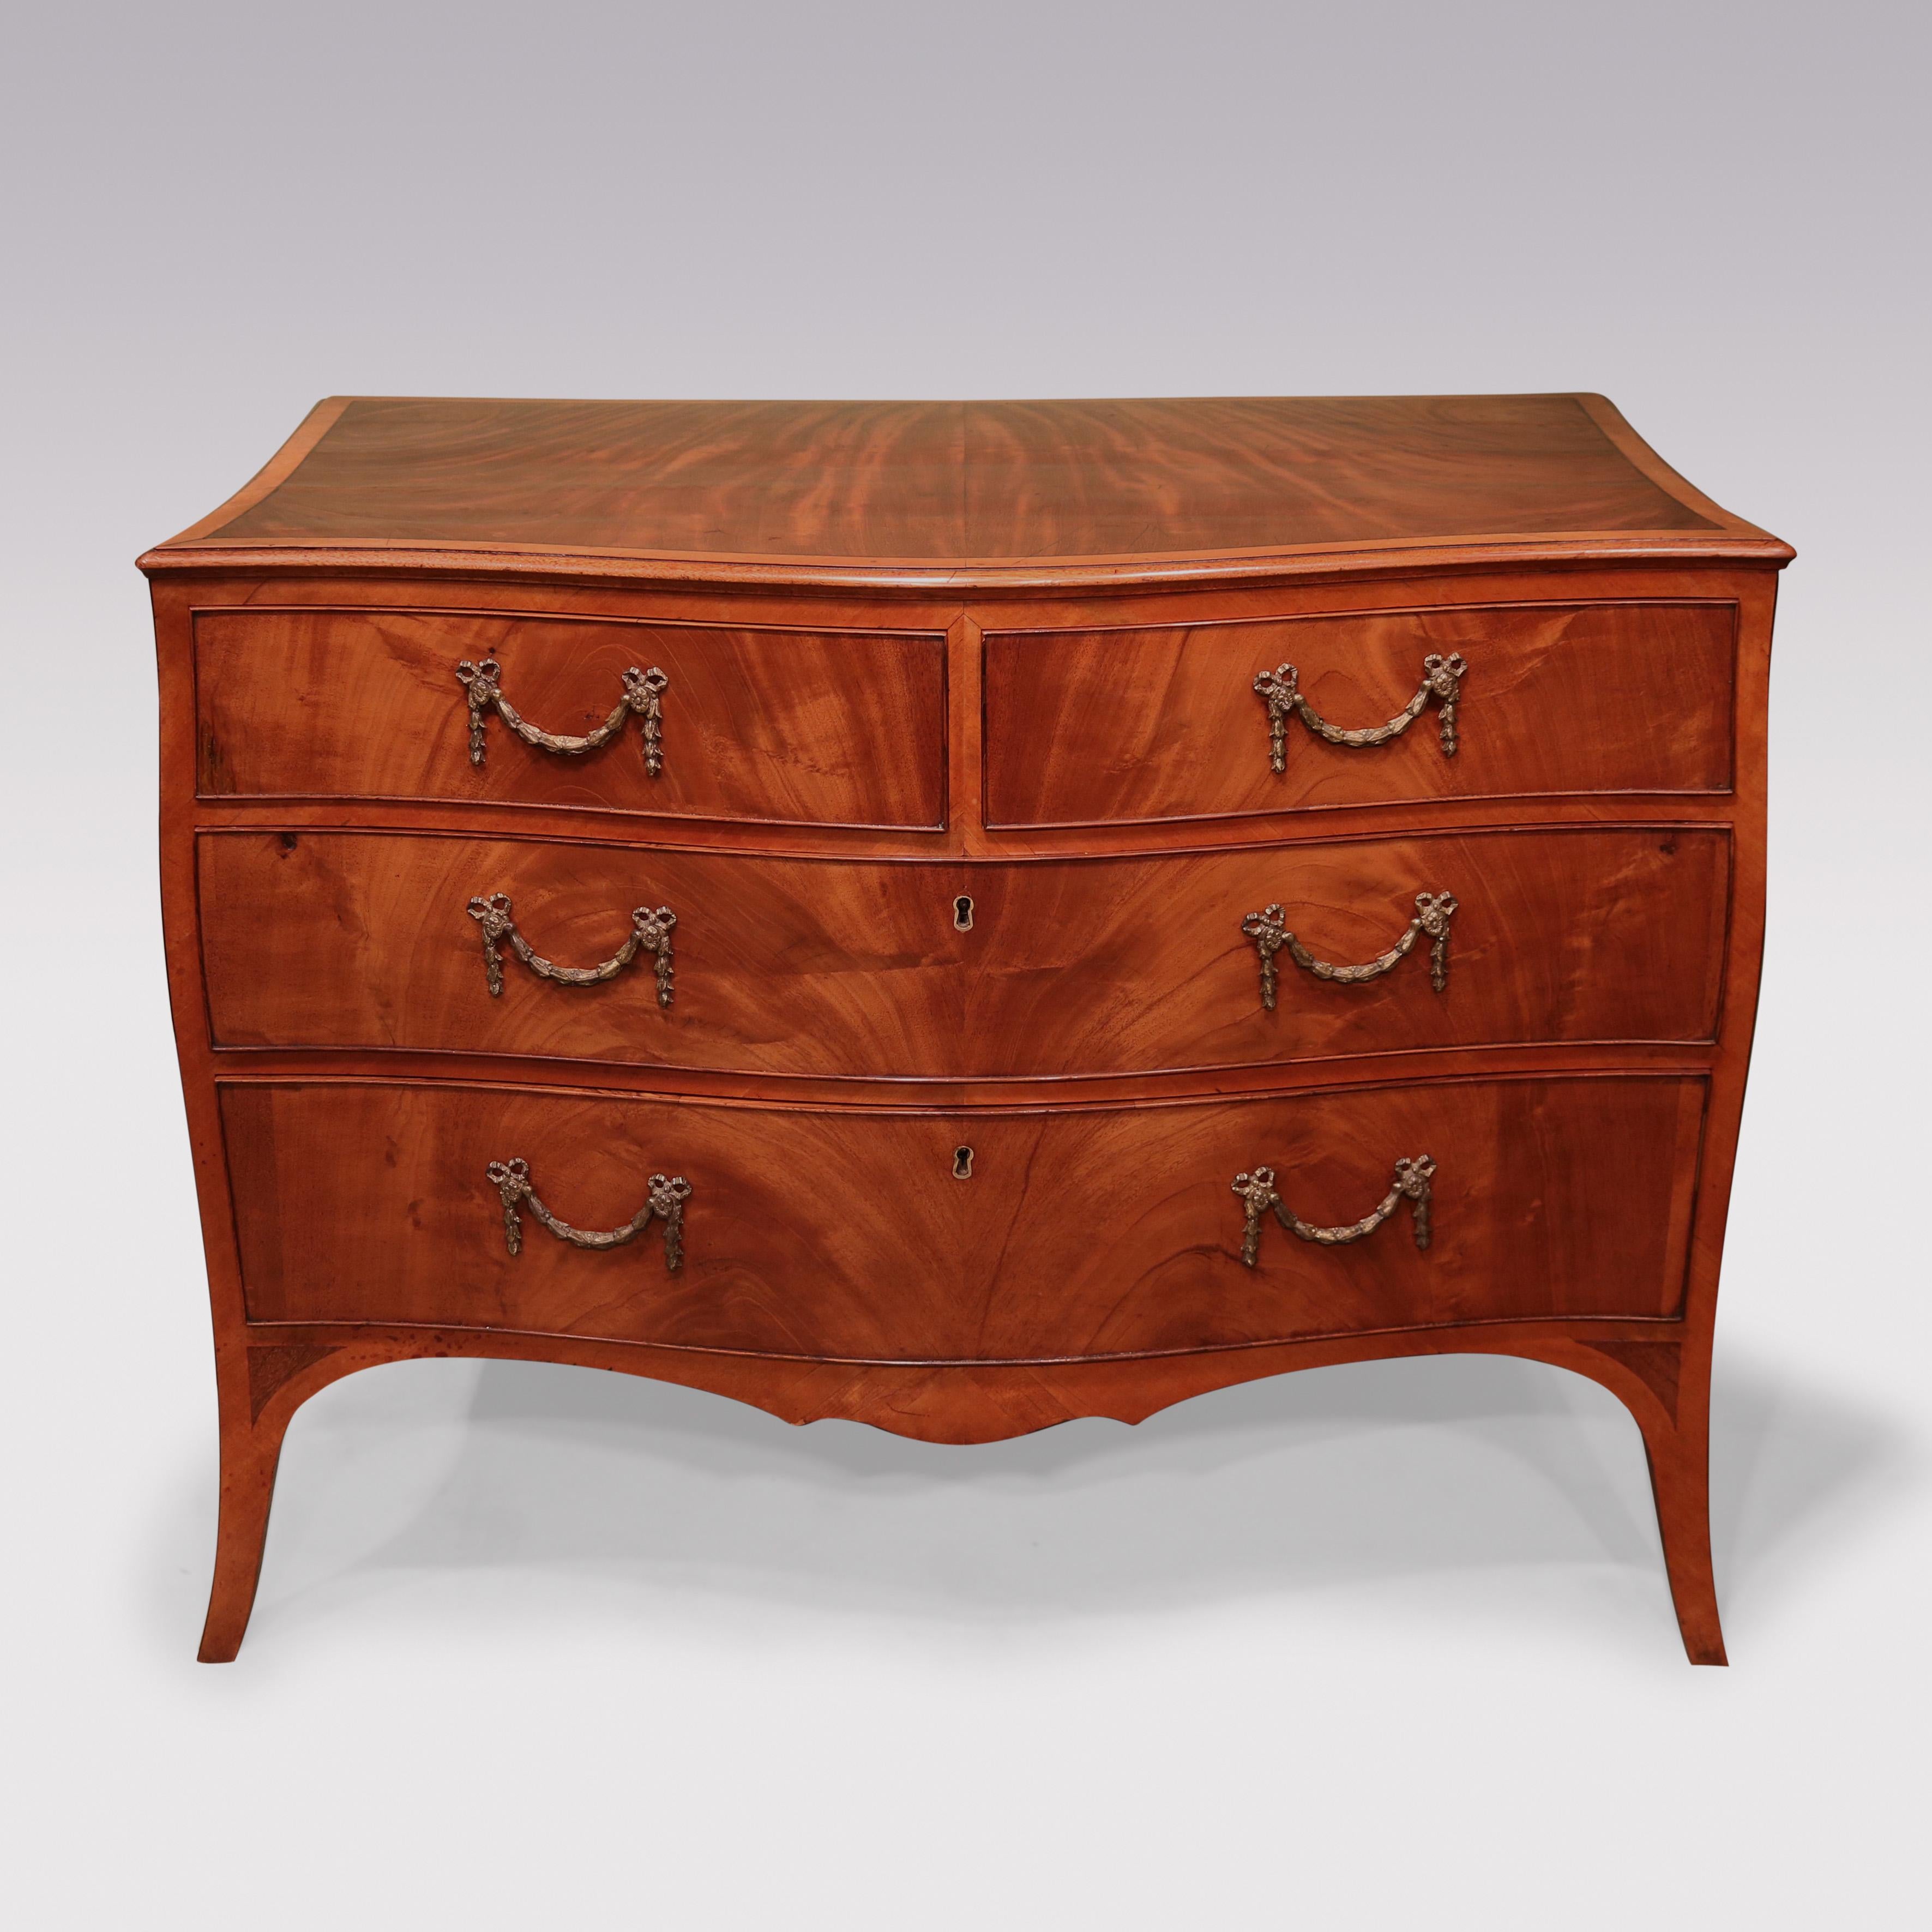 A fine late 18th Century Hepplewhite period figured mahogany serpentine Chest having book-matched, ebony strung & satinwood banded top above 2 short & 2 long rosewood cockbeaded drawers retaining original gilt brass swag & garland handles.  The